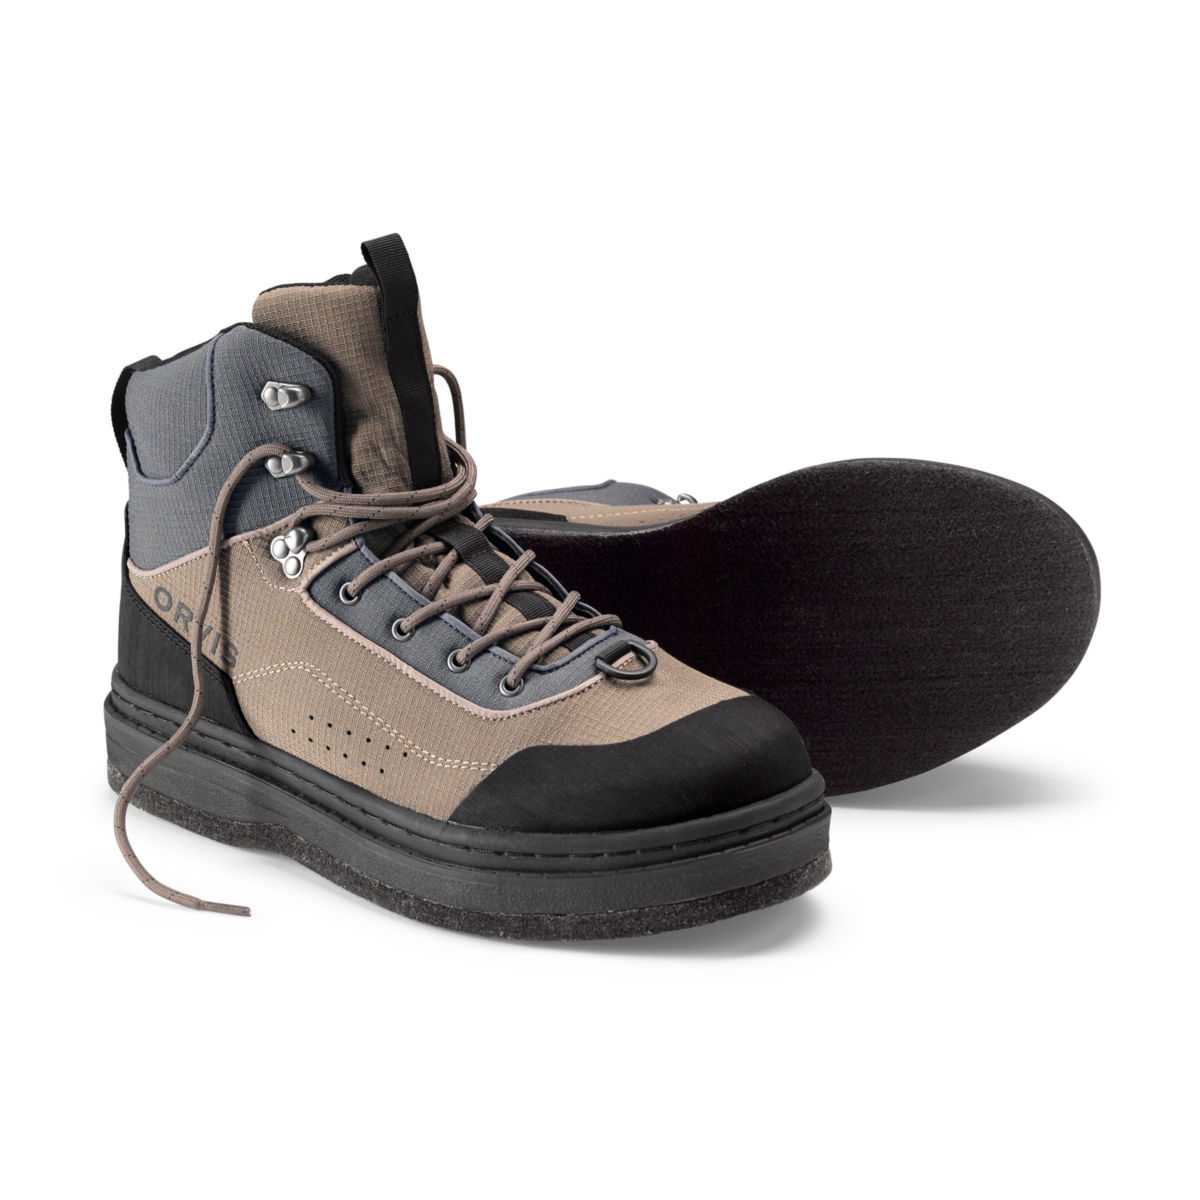 Orvis Encounter Wading Boots 